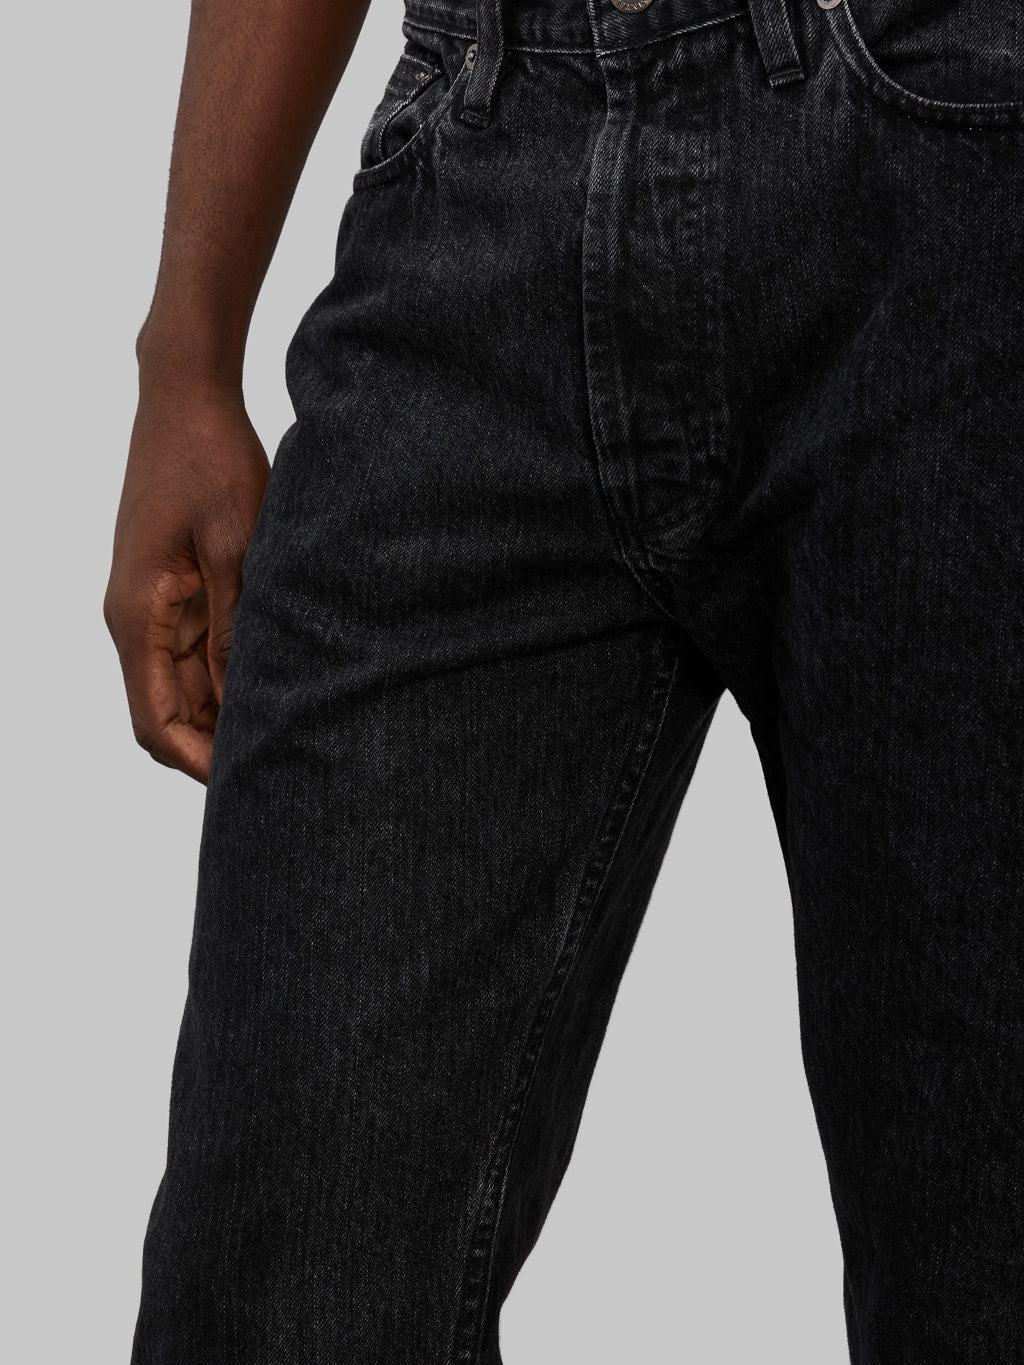 3sixteen CT 220x Classic Tapered Stonewashed Double Black inseam